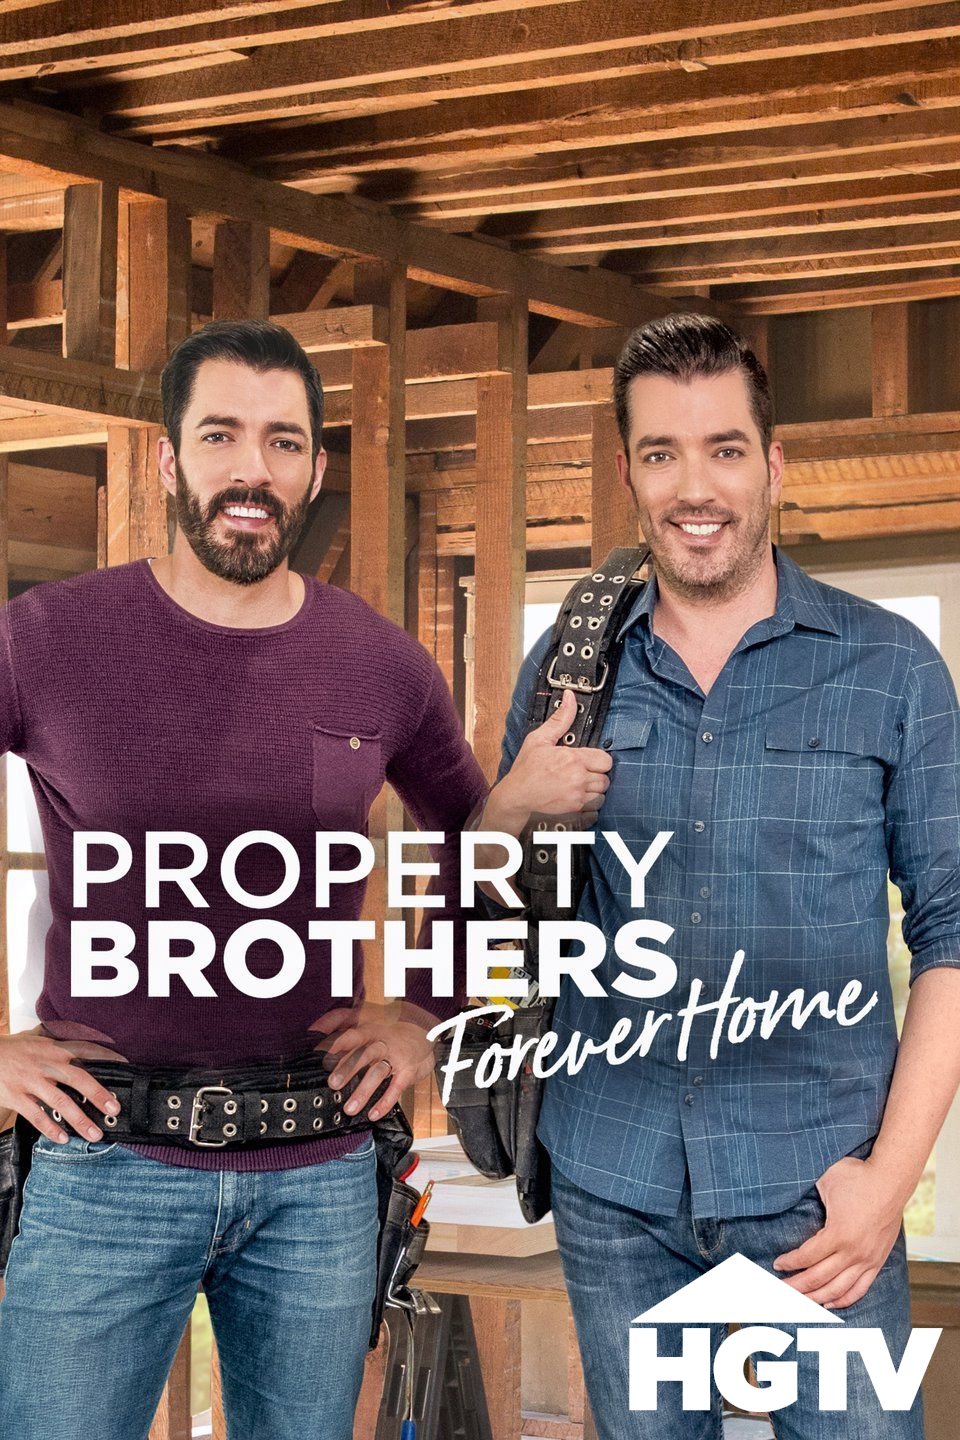 PROPERTY BROTHERS FOREVER HOME copy.jpg